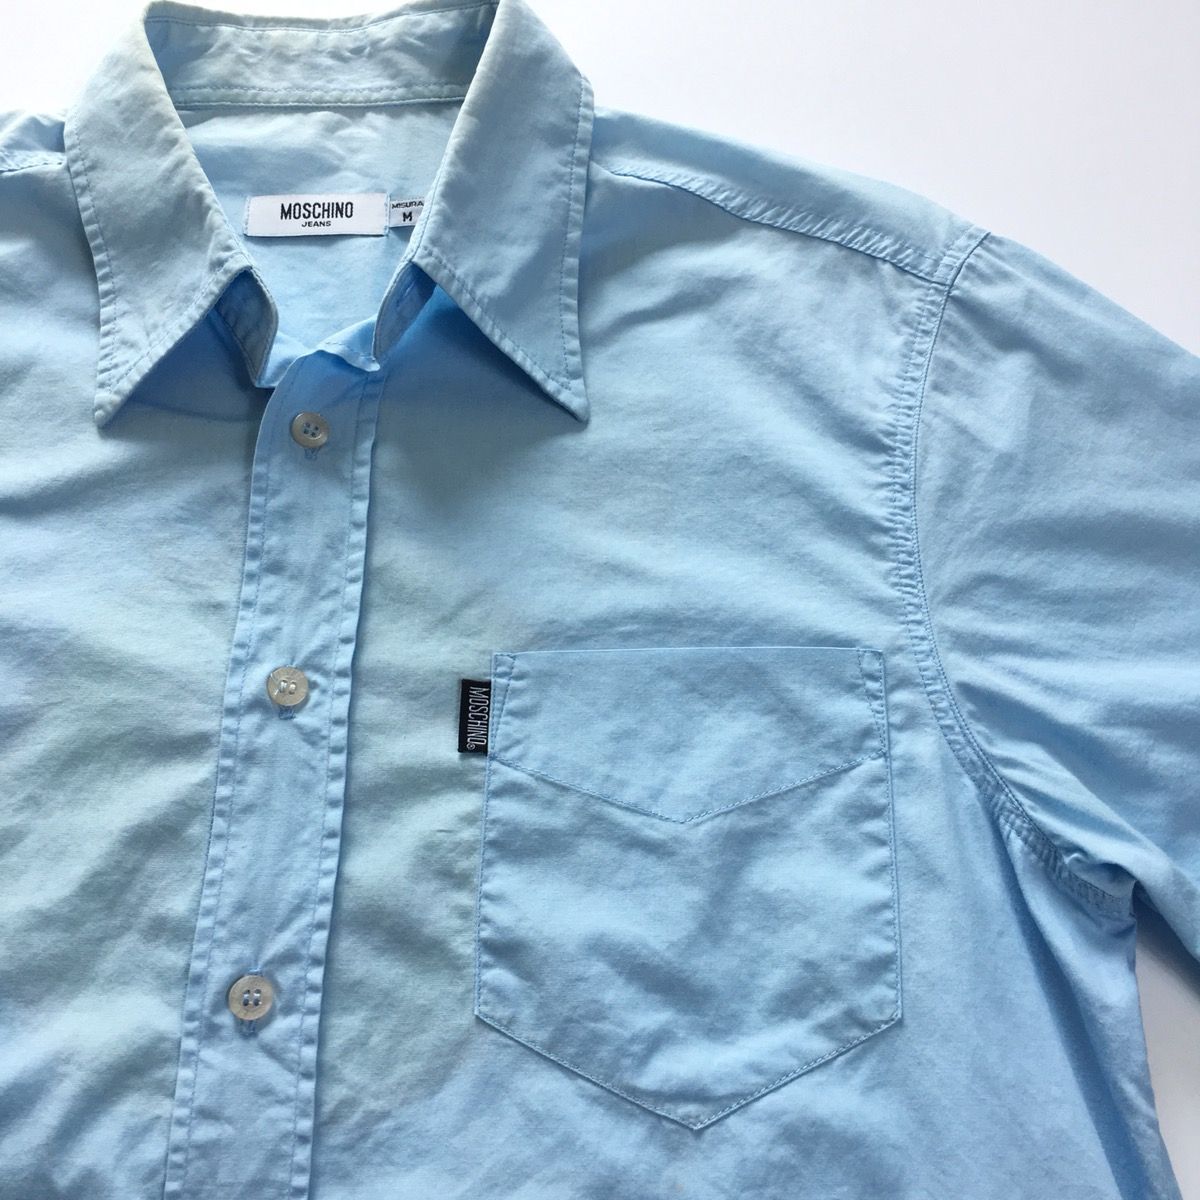 Moschino Jeans Rally 31 Button Shirt - 4